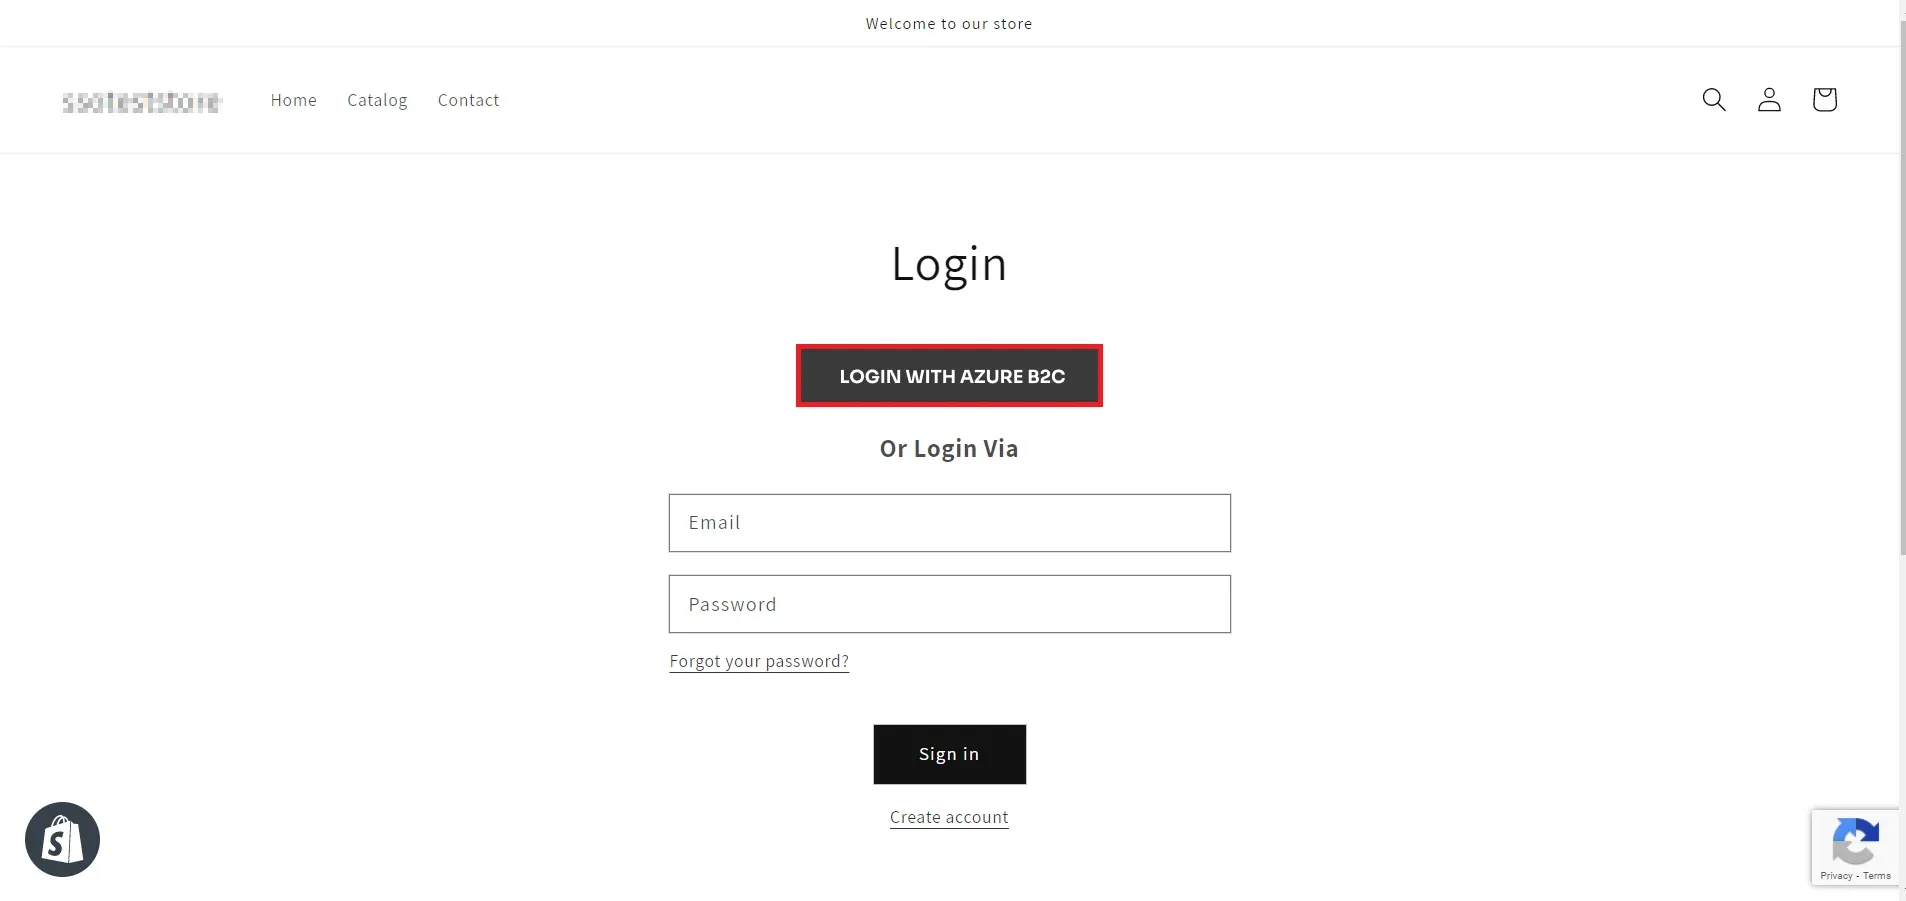 Azure AD B2C Shopify (SSO) - click on login button